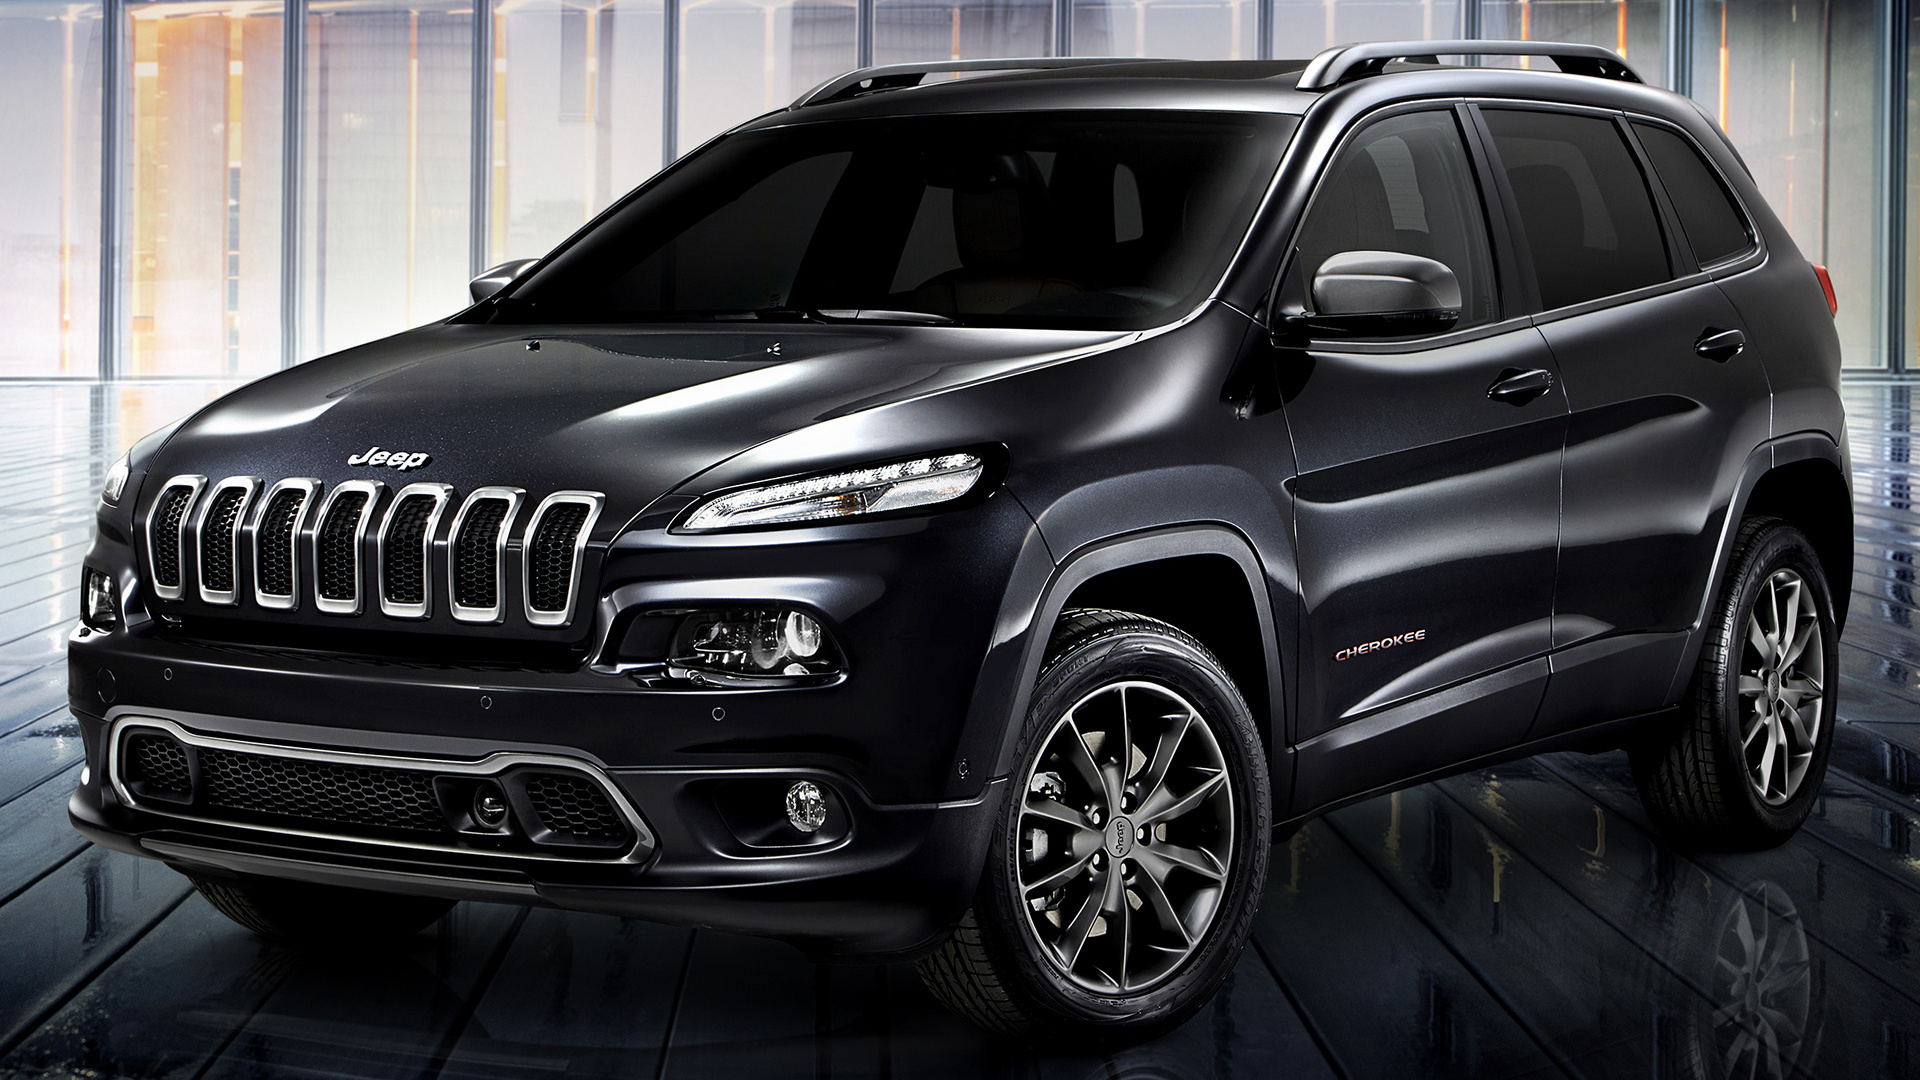 2010 Jeep Grand Cherokee - Wallpapers and HD Images | Car Pixel